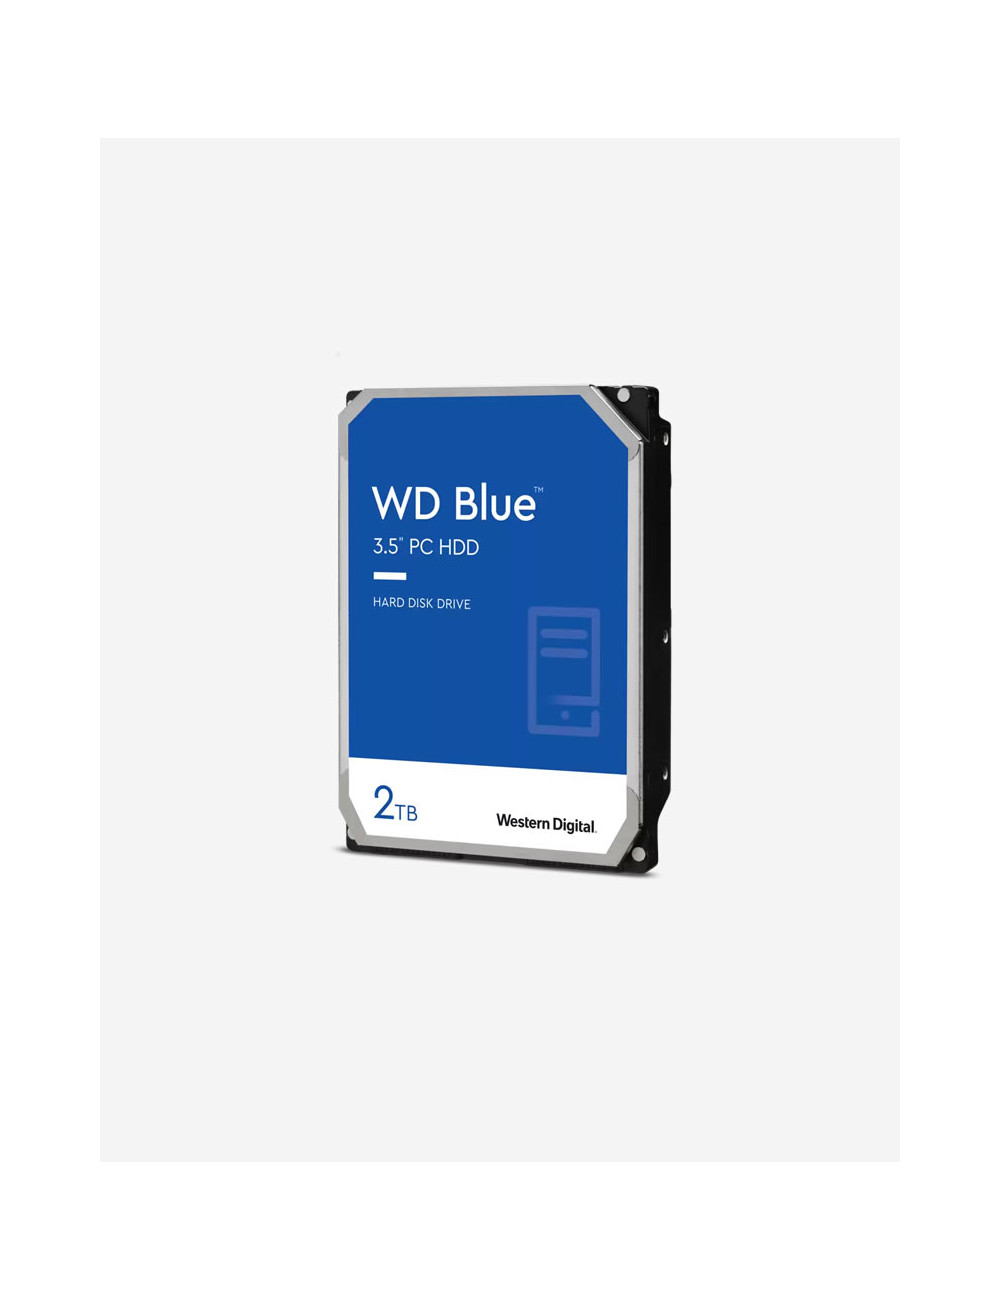 https://www.ewall.store/10626-large_default/wd-blue-2to-disque-dur-hdd-35.jpg